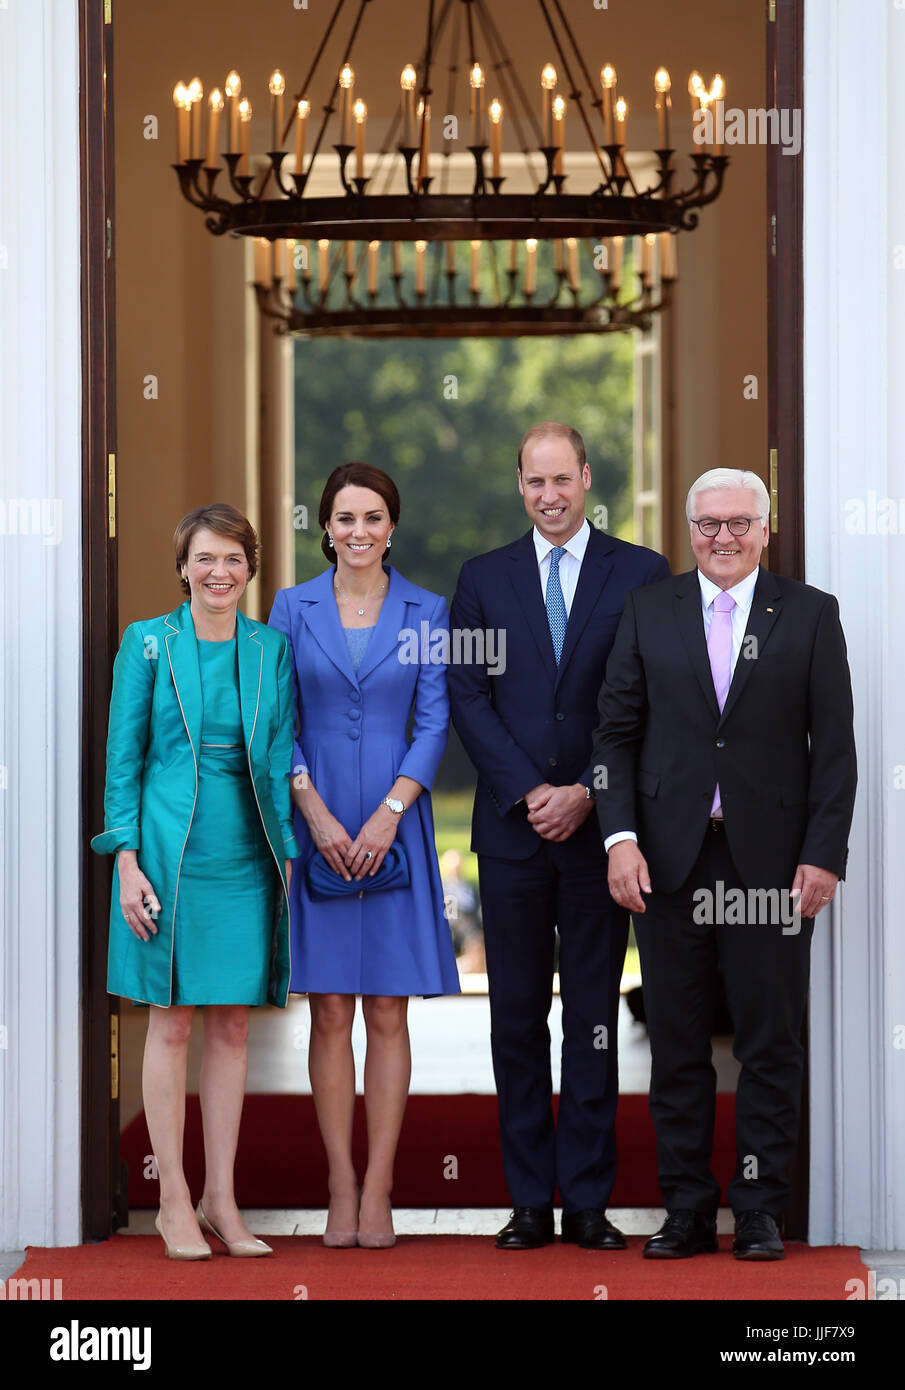 The Duke and Duchess of Cambridge meet Federal President of Germany Frank-Walter Steinmeier and his wife Elke Buedenbender at Bellevue Palace Gardens in Berlin. Stock Photo